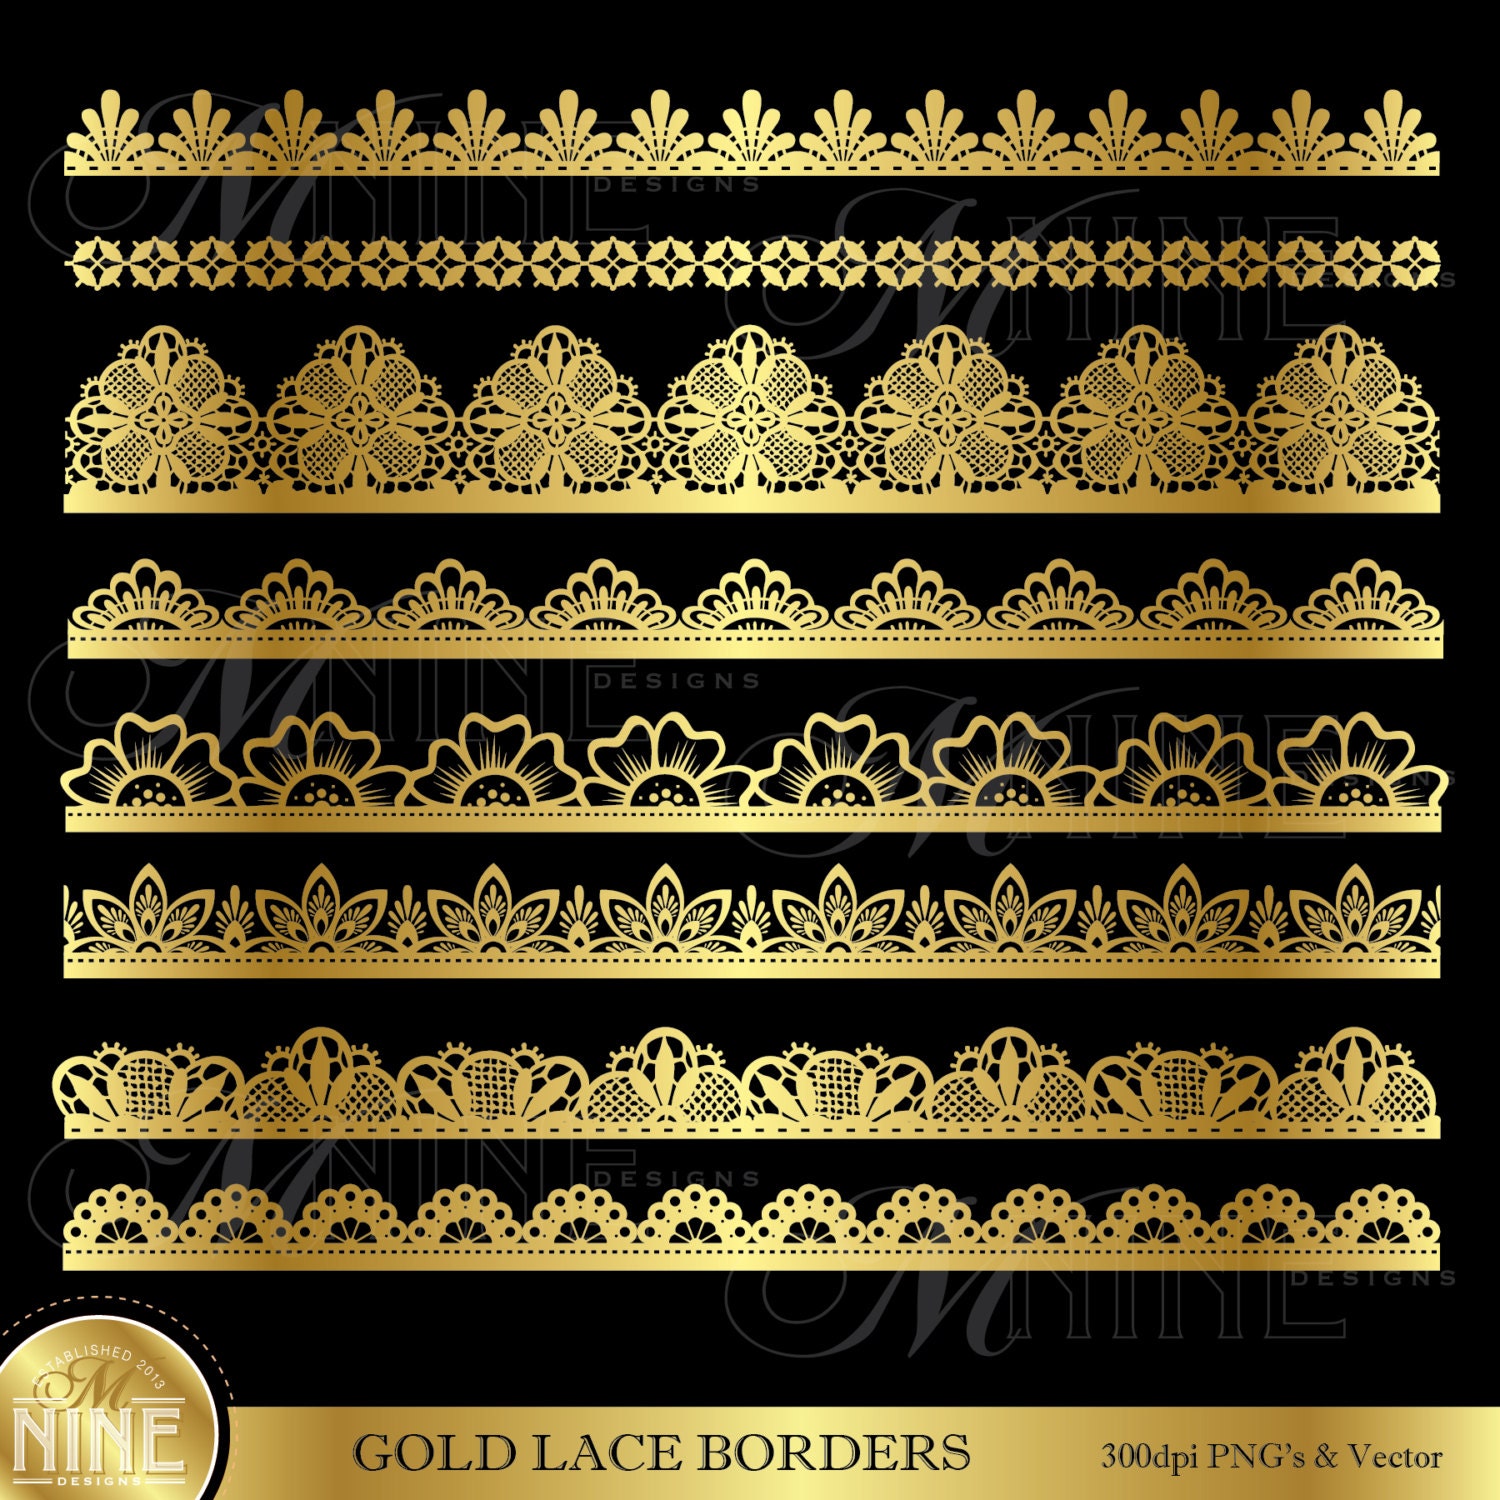 Gold lace pattern Royalty Free Vector Image - VectorStock